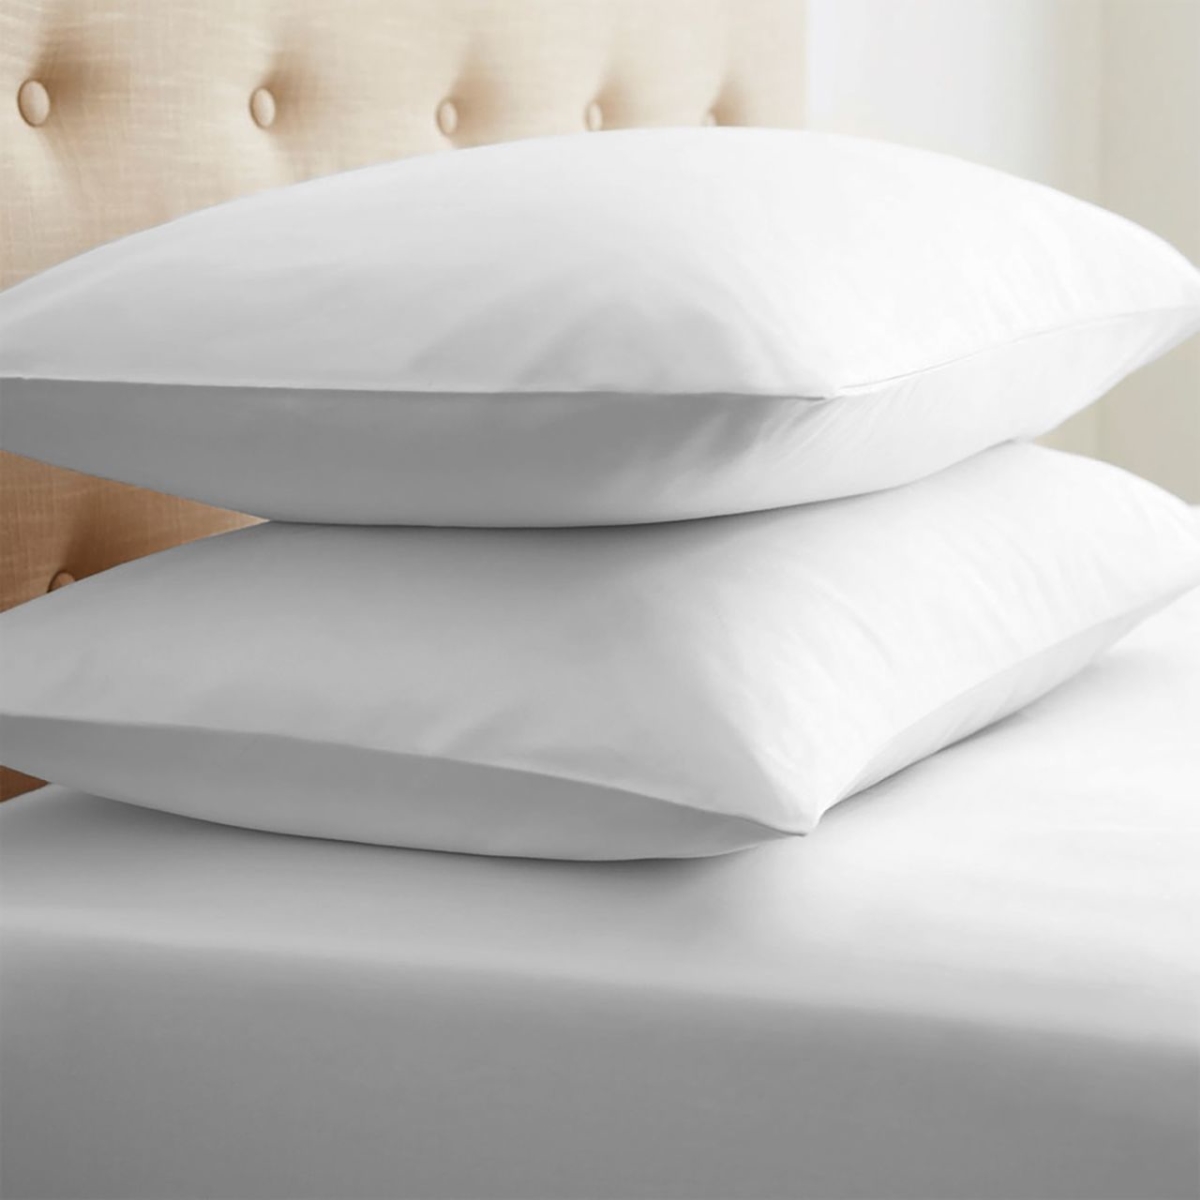 2185630 Soft Essentials Double-brushed Microfiber 2 Piece Pillow Case Set - White - Standard Case Of 24